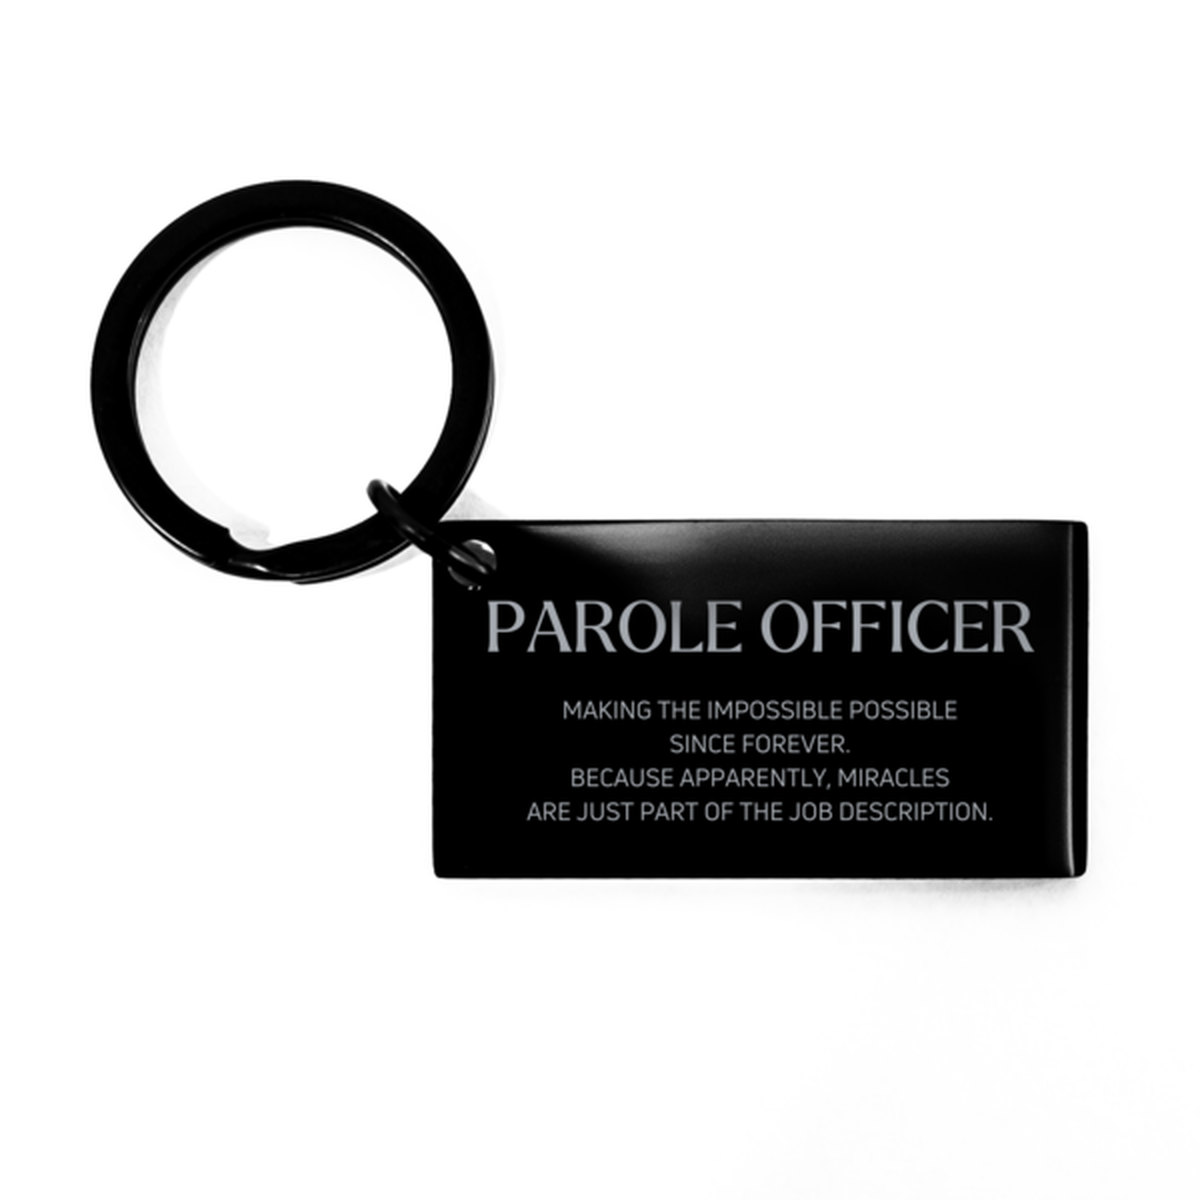 Funny Parole Officer Gifts, Miracles are just part of the job description, Inspirational Birthday Keychain For Parole Officer, Men, Women, Coworkers, Friends, Boss